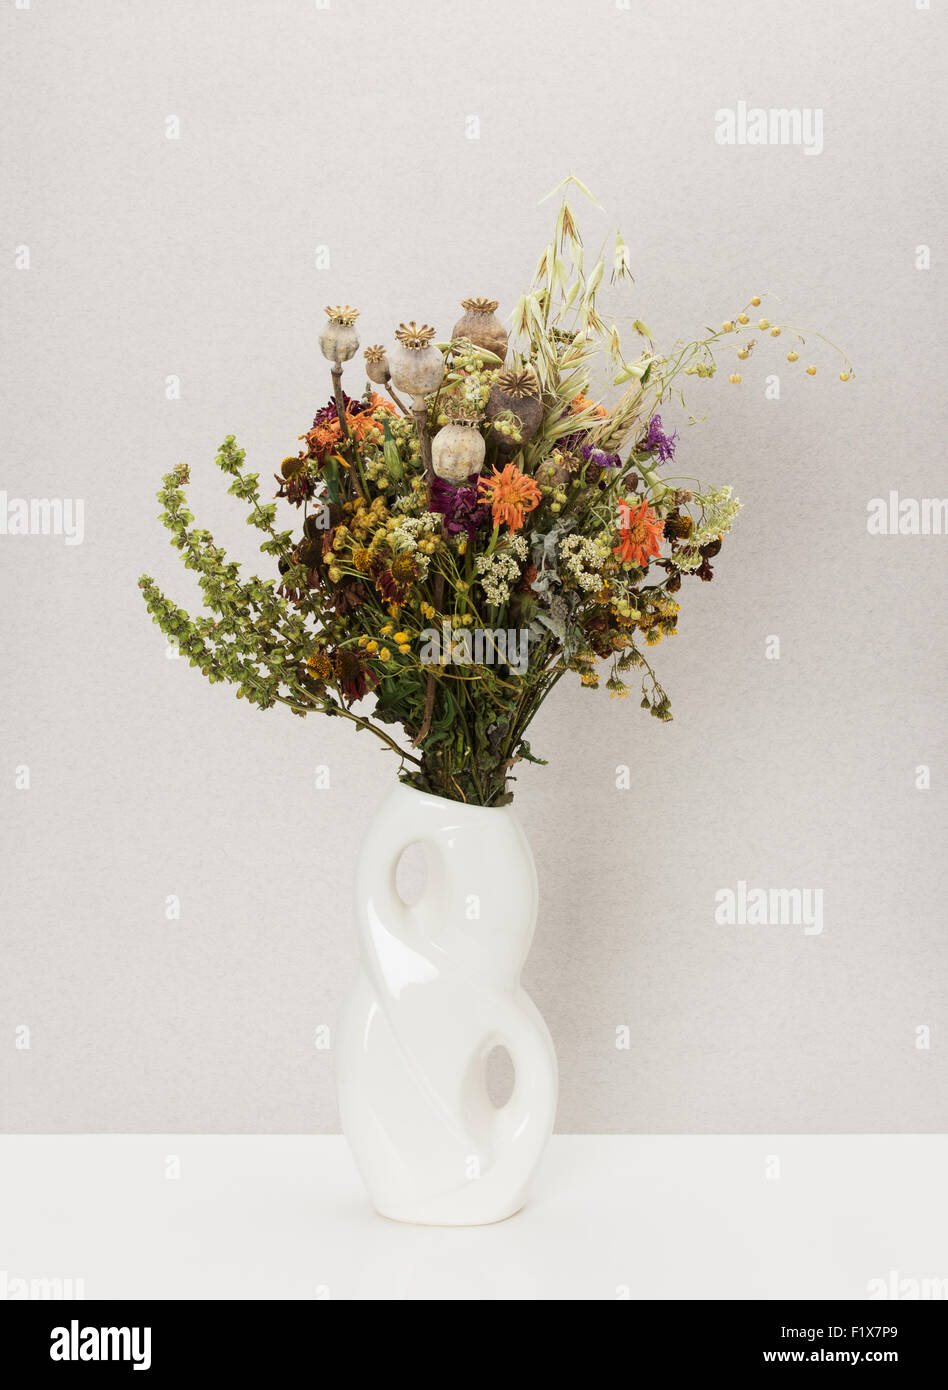 Dried flowers in porcelain vase. Stock Photo